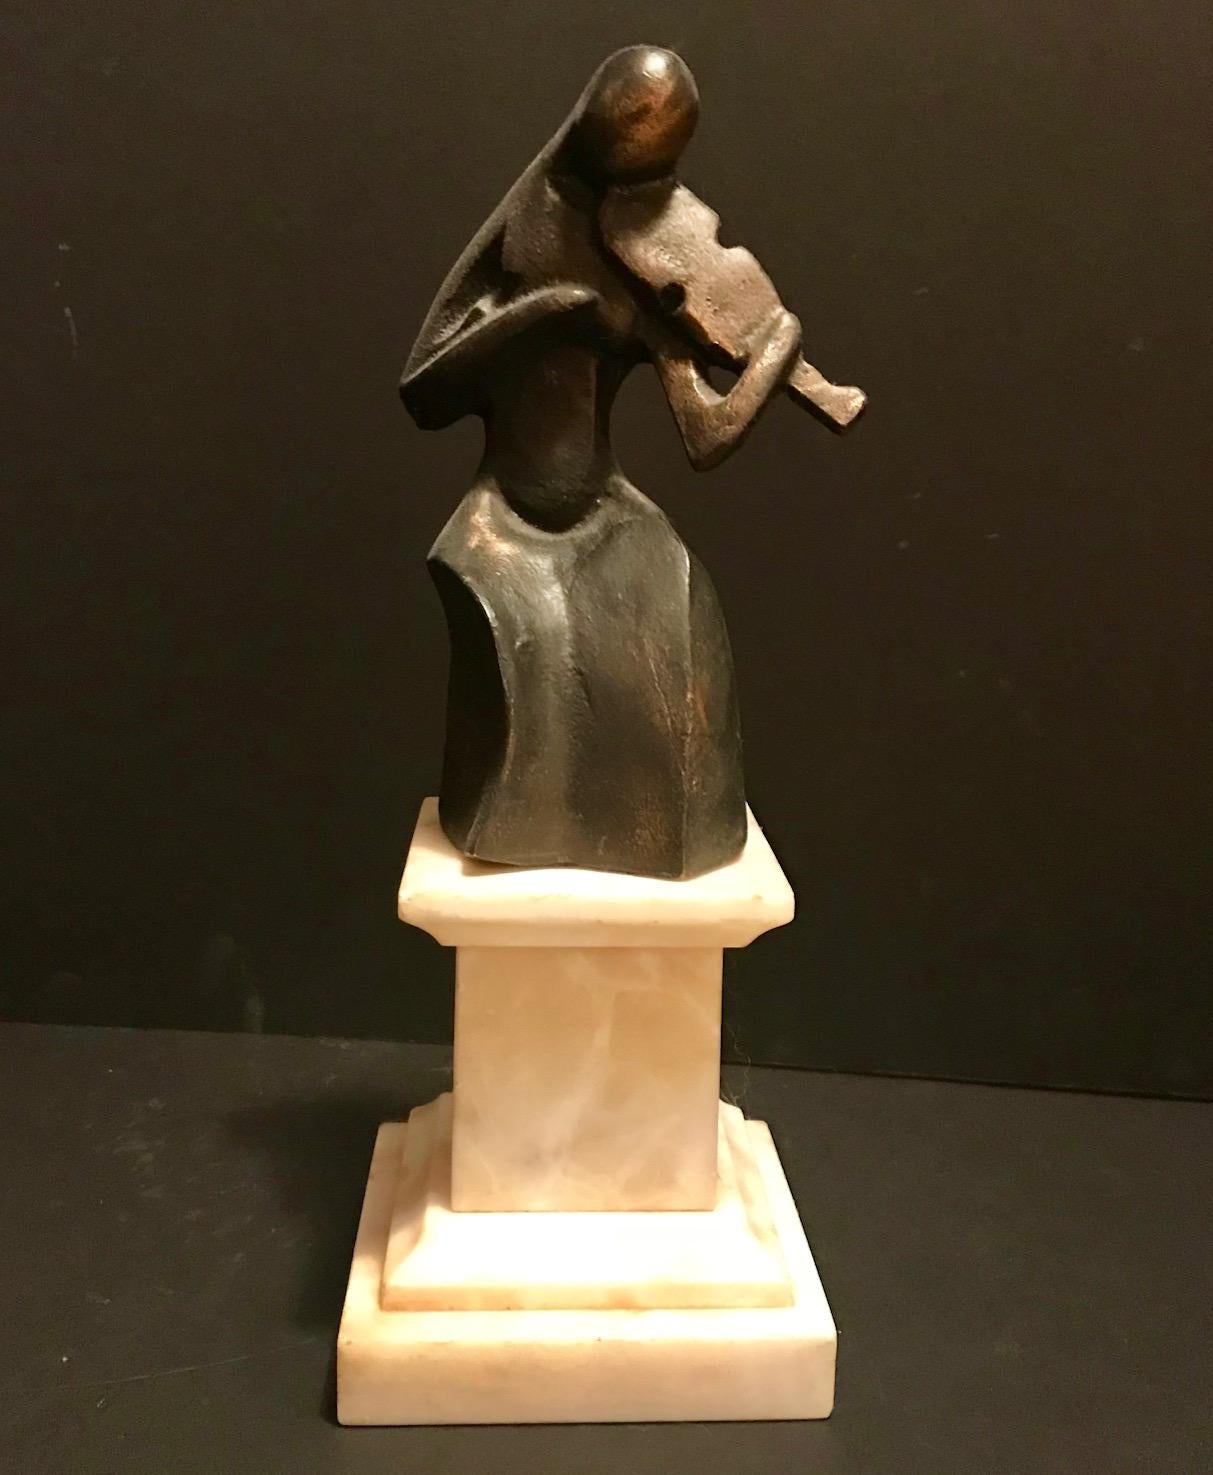 This highly interesting sculpture of a devoted violinist is executed in pure Cubist style. It has a rich dark patina. The bronze statue is mounted on an alabaster plinth. Underneath the base is a paper label attached which states, PABLO CURATELLA